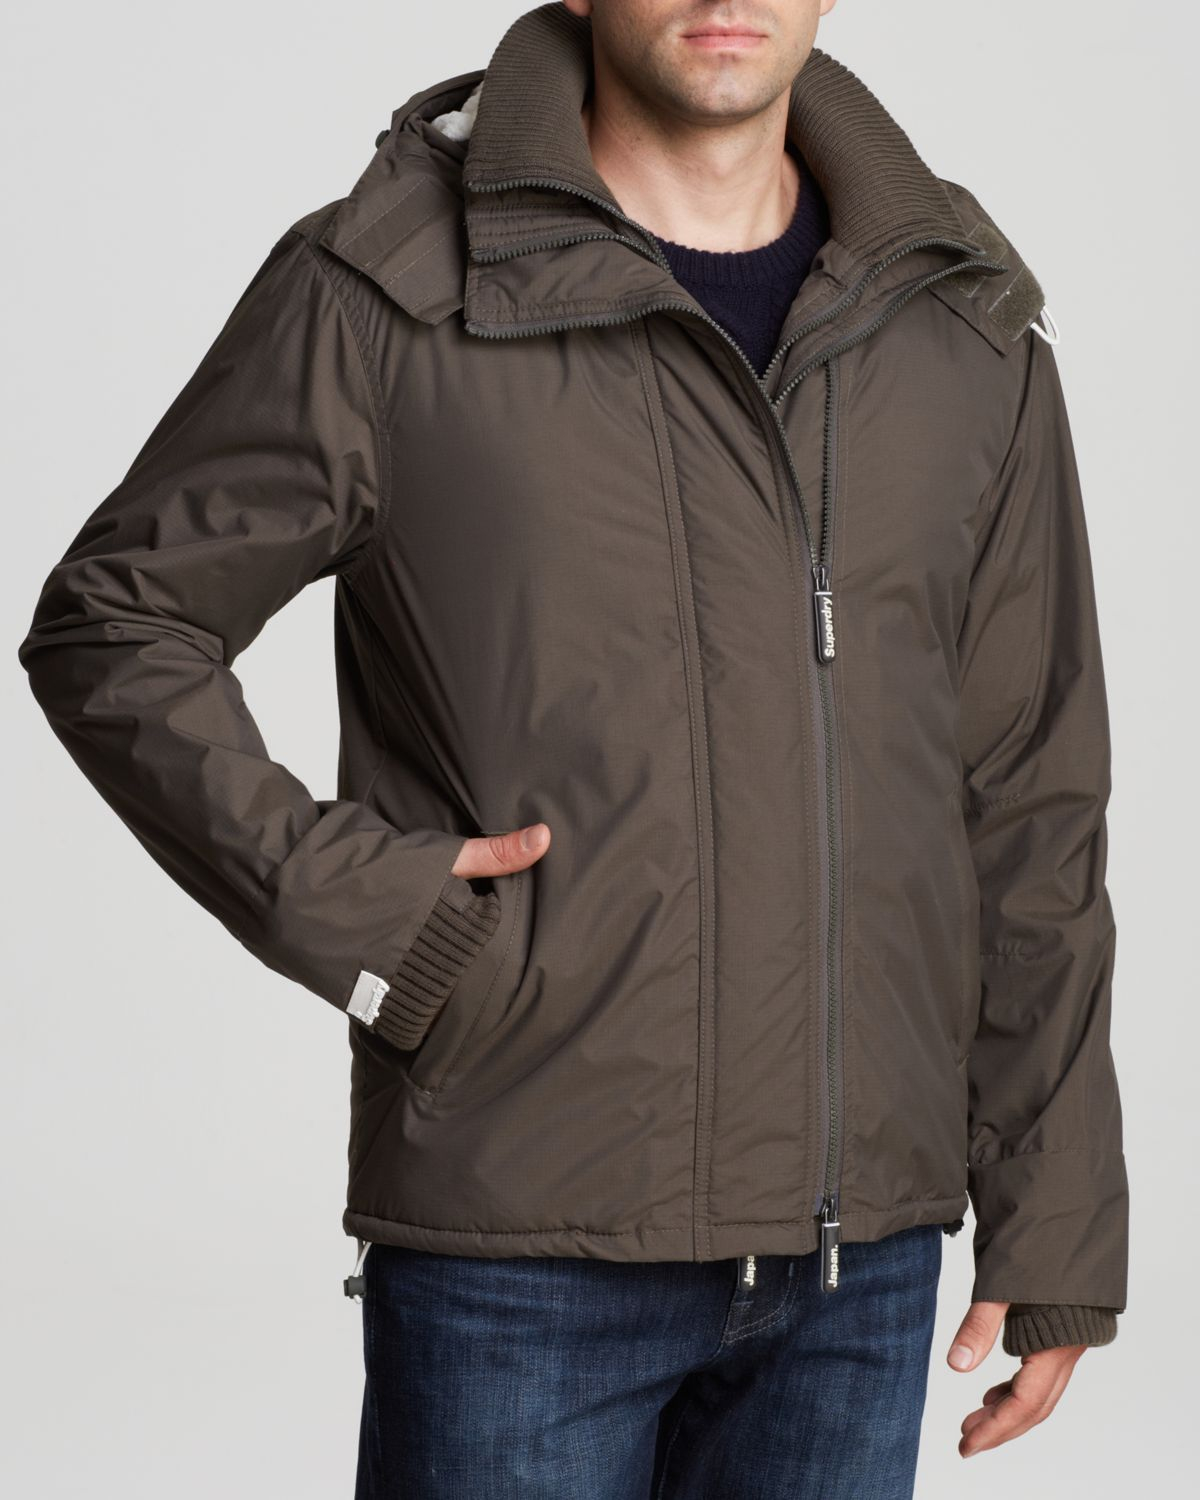 Superdry Hooded Sherpa Windcheater in Army Green (Green) for Men - Lyst